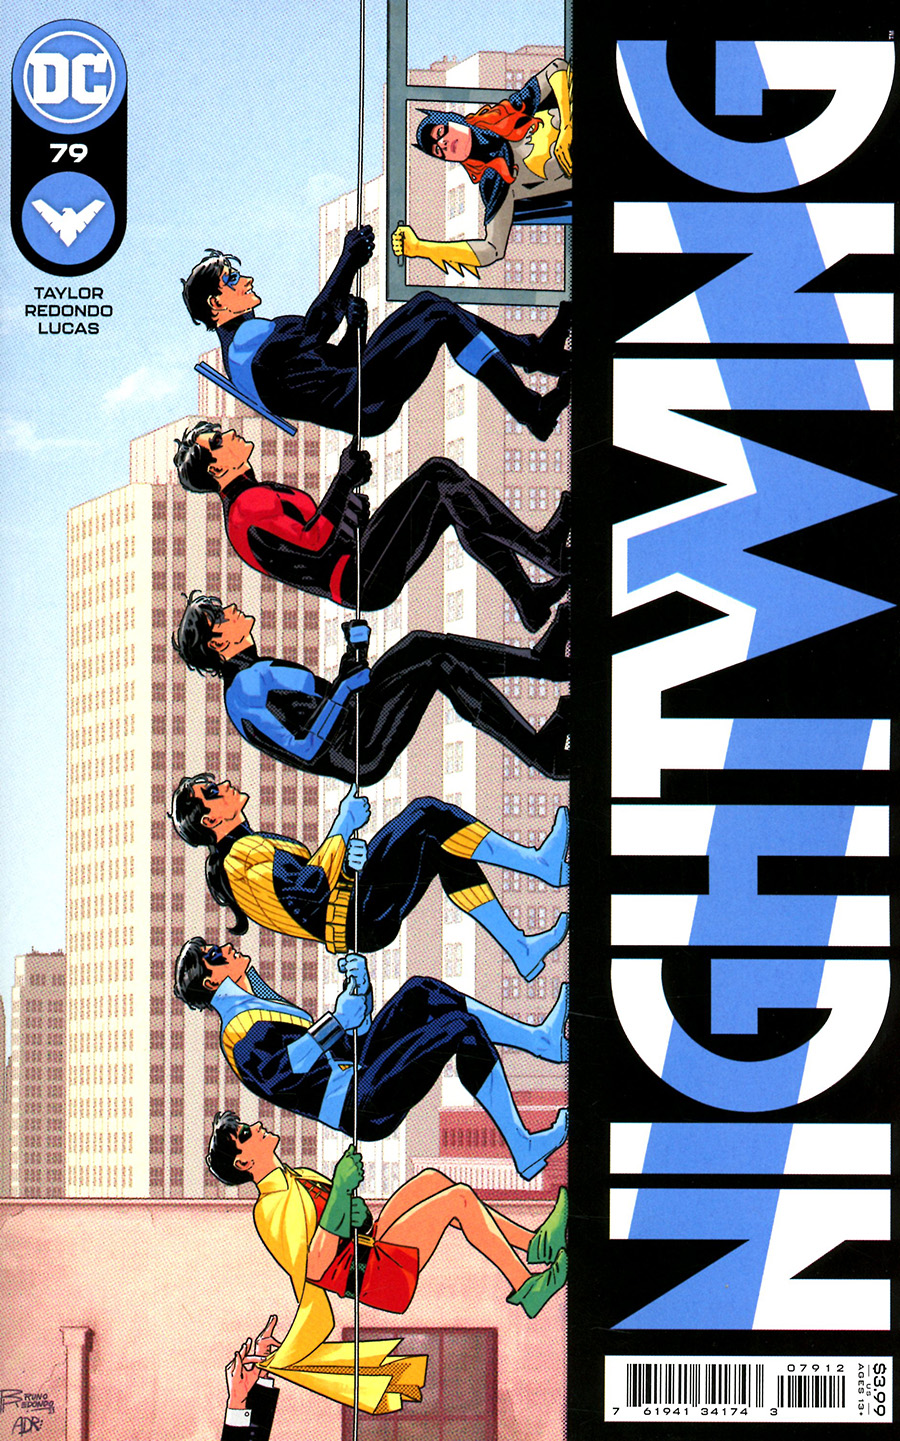 Nightwing Vol 4 #79 Cover C 2nd Ptg Bruno Redondo Variant Cover (Limit 1 Per Customer)